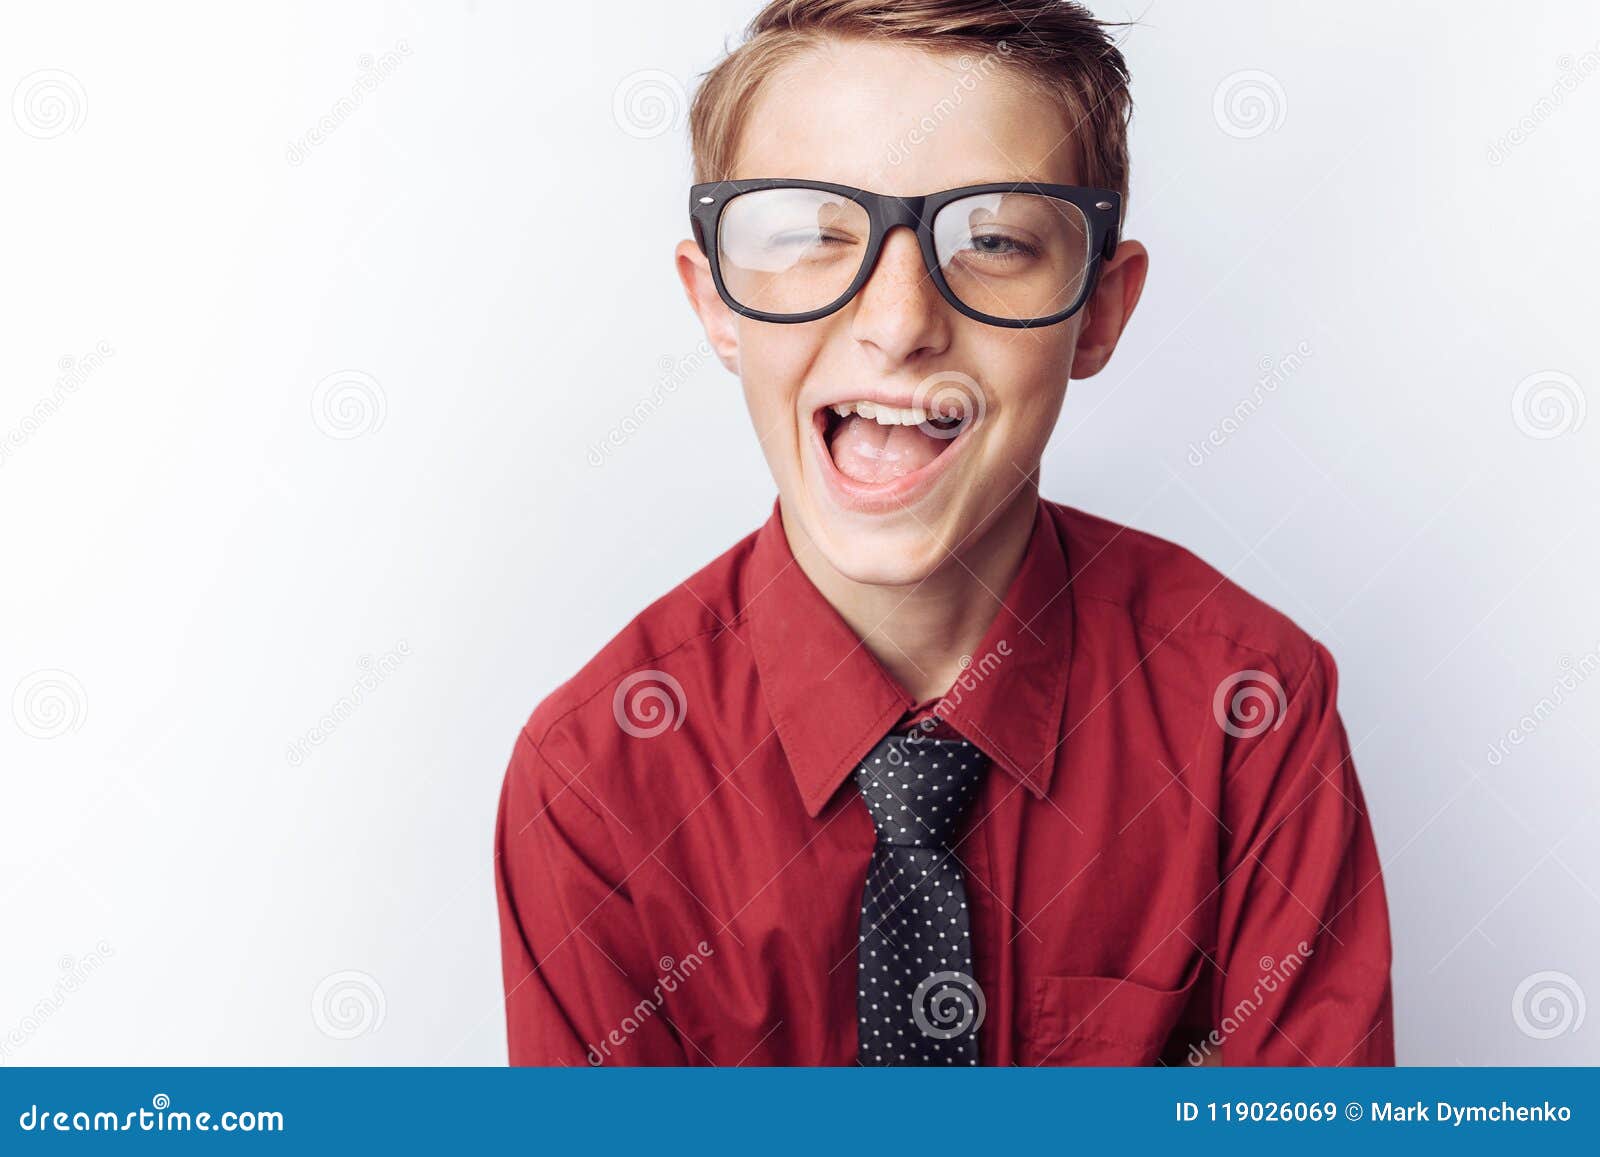 Portrait of a positive teenager on a white background, glasses, red shirt, advertising, text insert